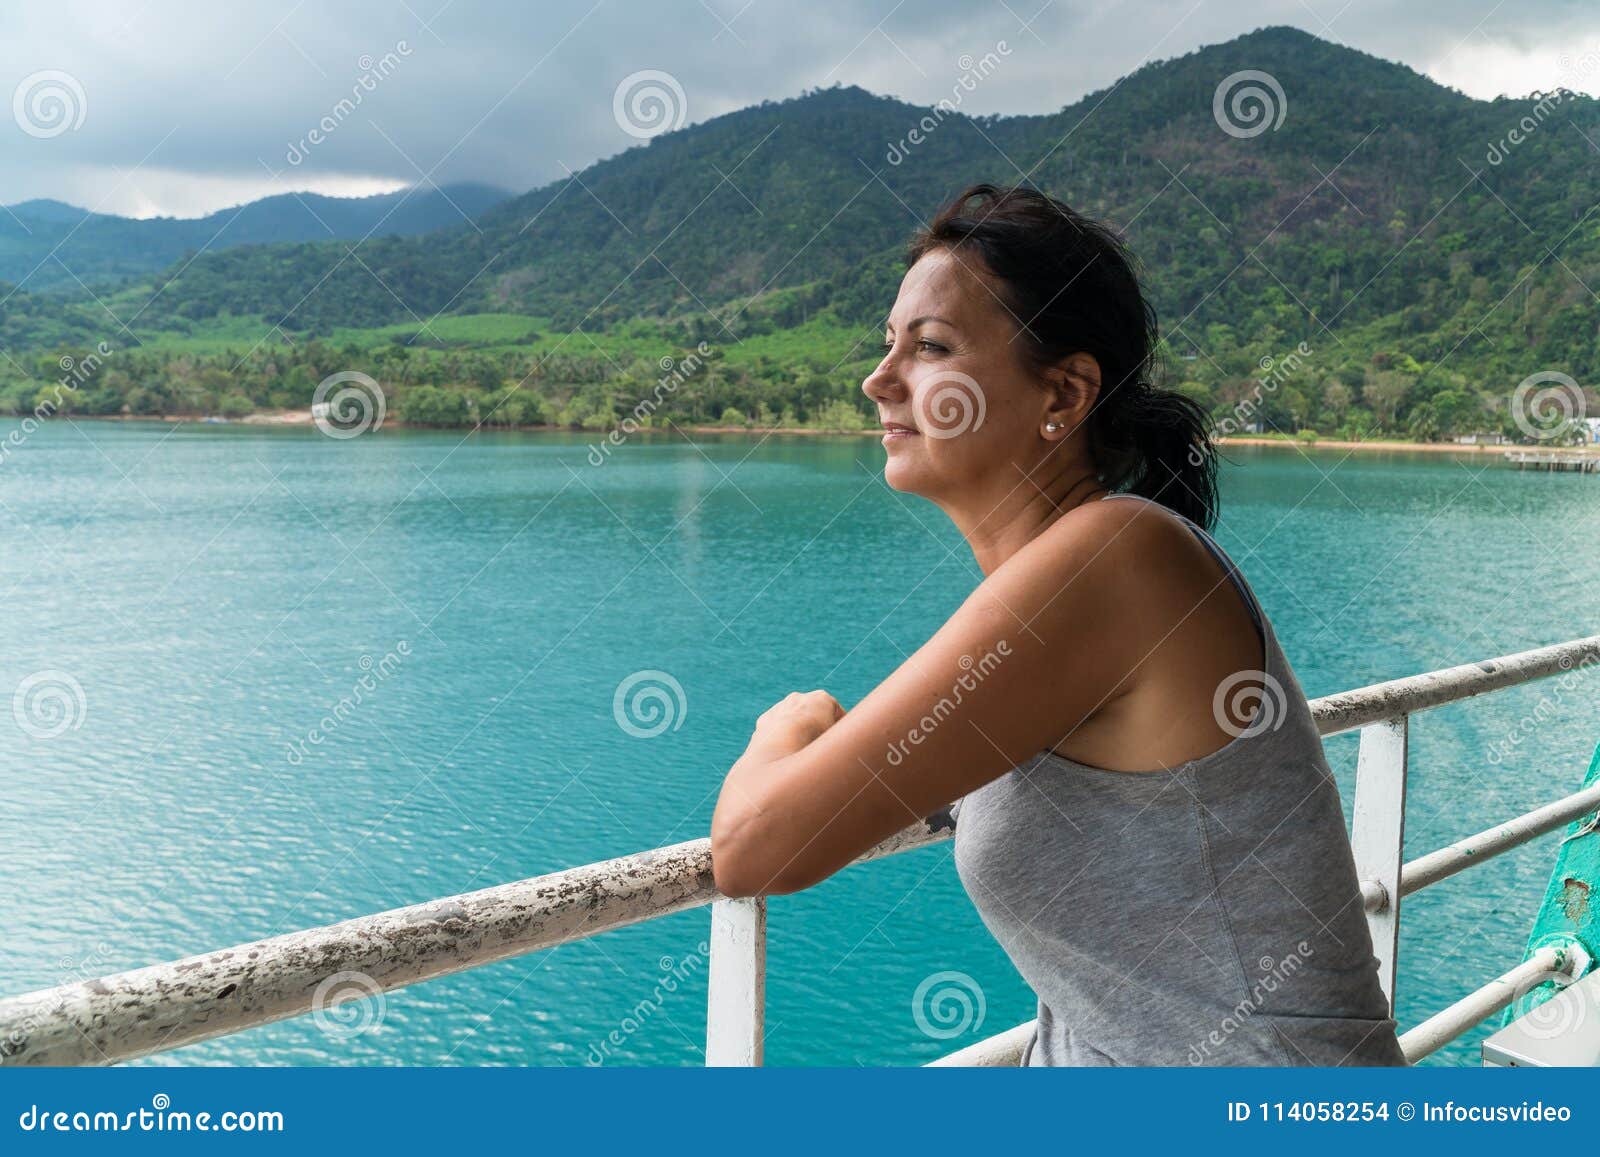 tourist woman looking at sea view from boat